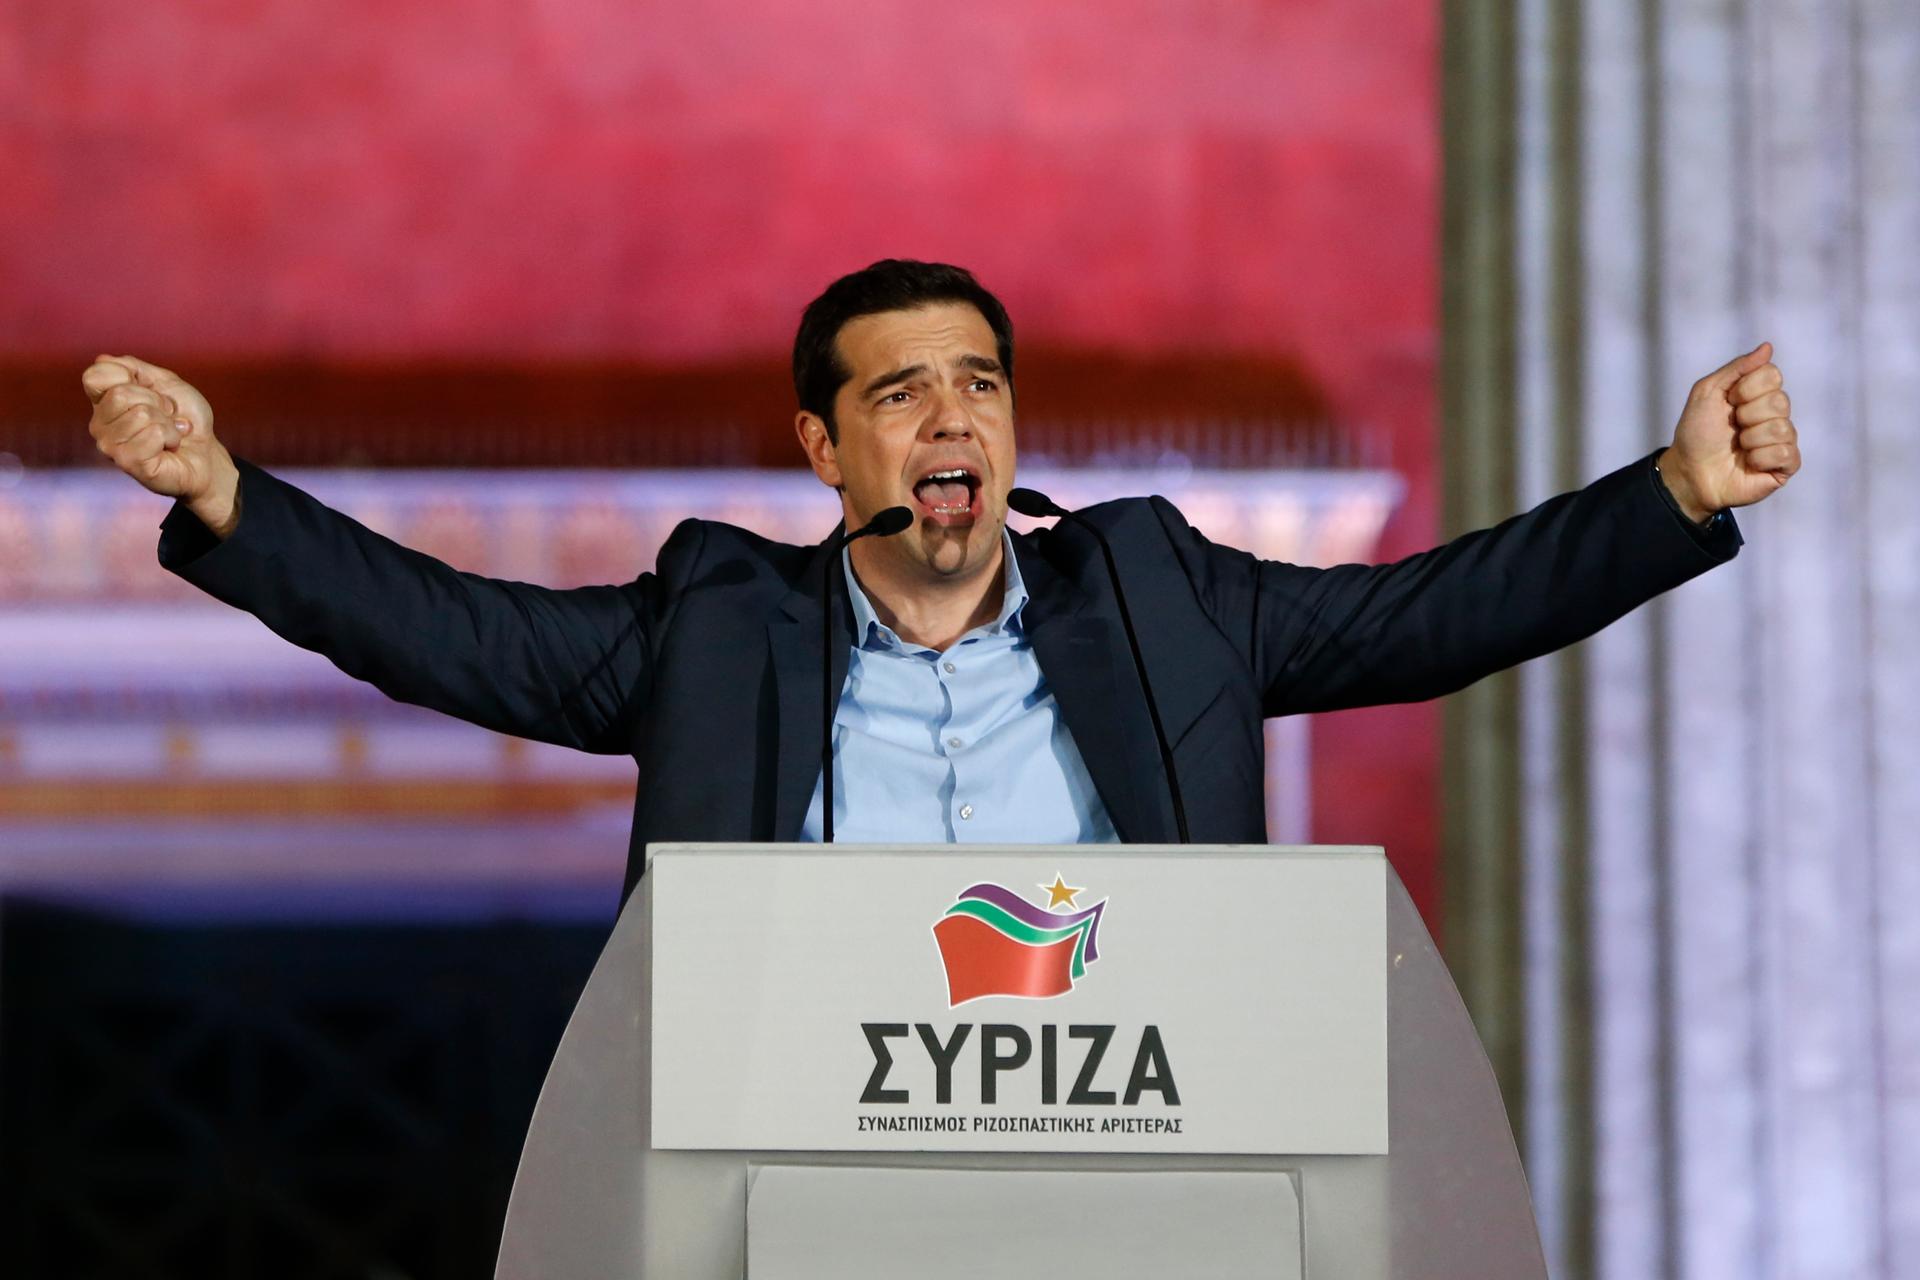 The head of radical leftist Syriza party Alexis Tsipras speaks to supporters after winning the elections in Athens January 25, 2015